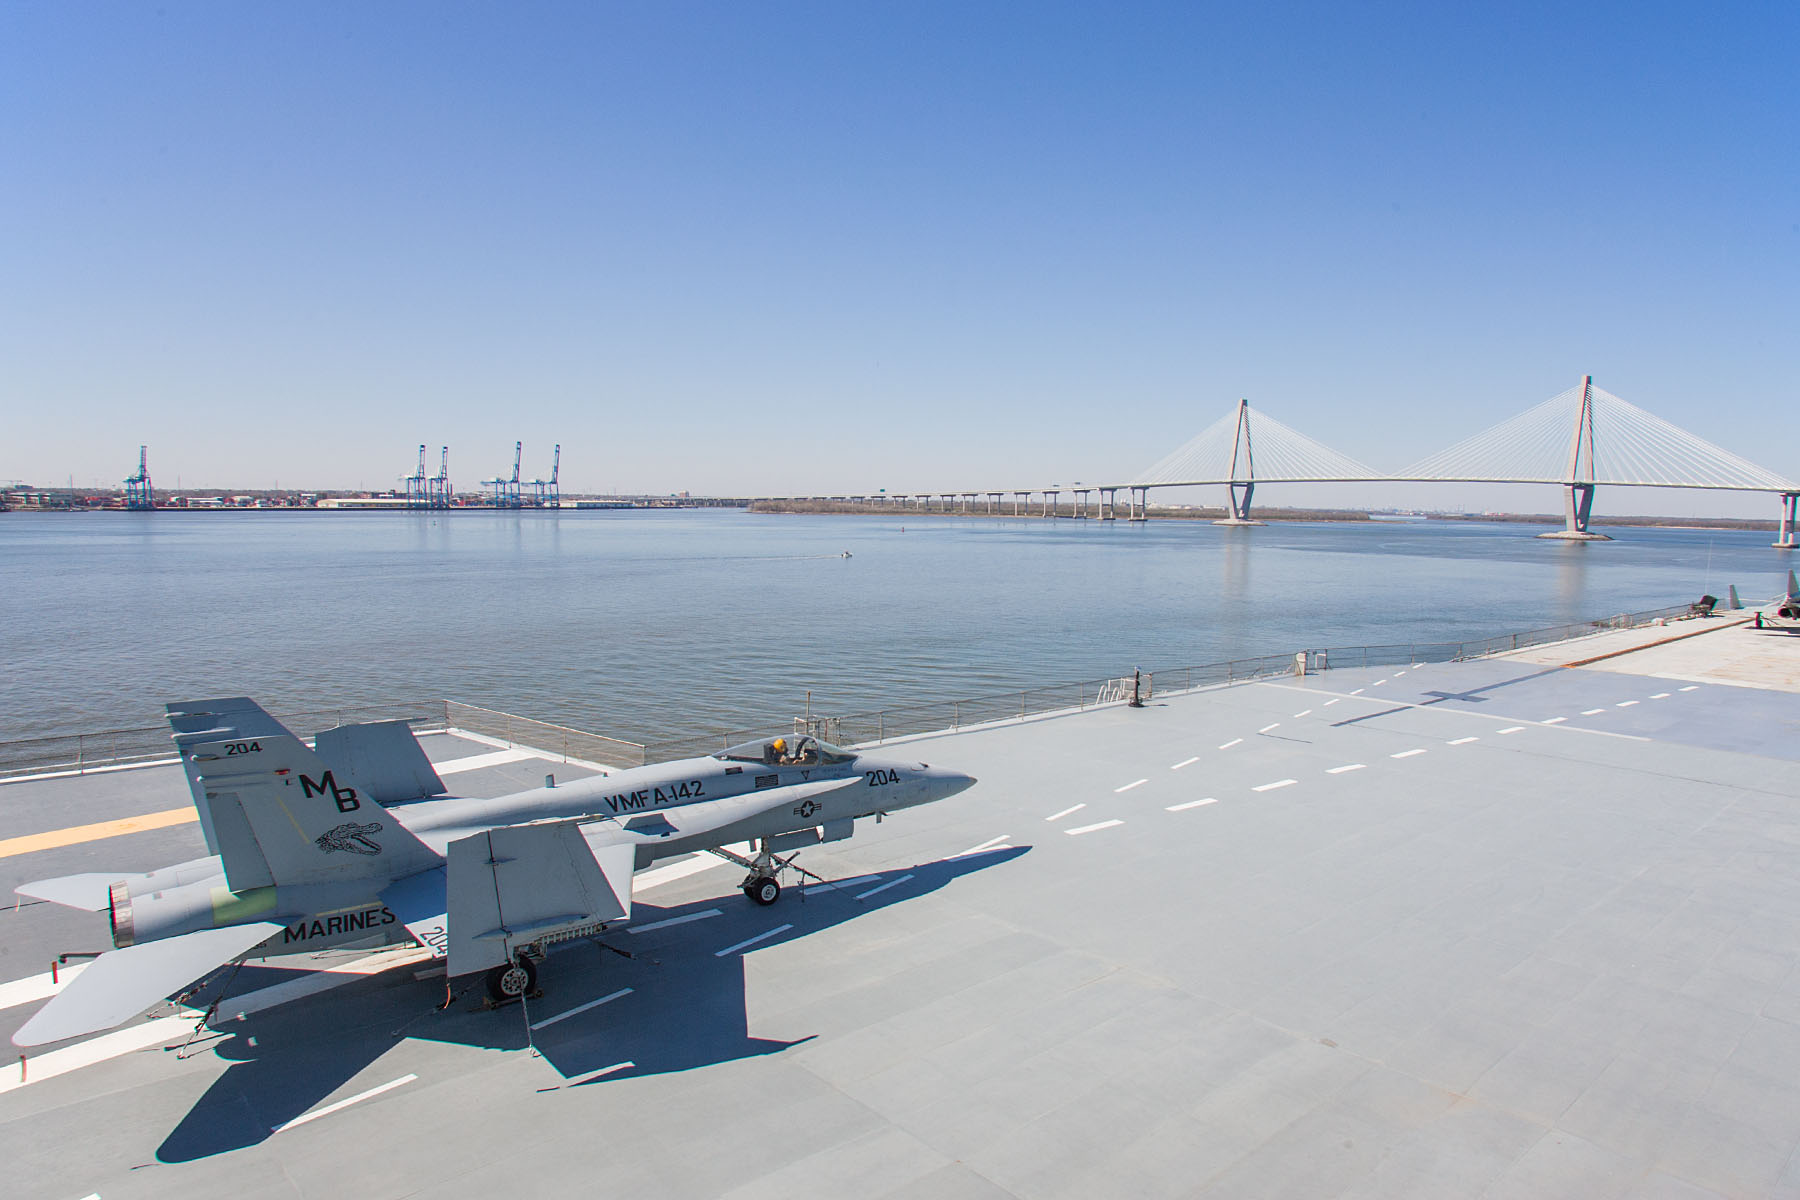 FA-18 Hornet on the deck of the USS Yorktown, Charleston, South Carolina.  Click for next photo.